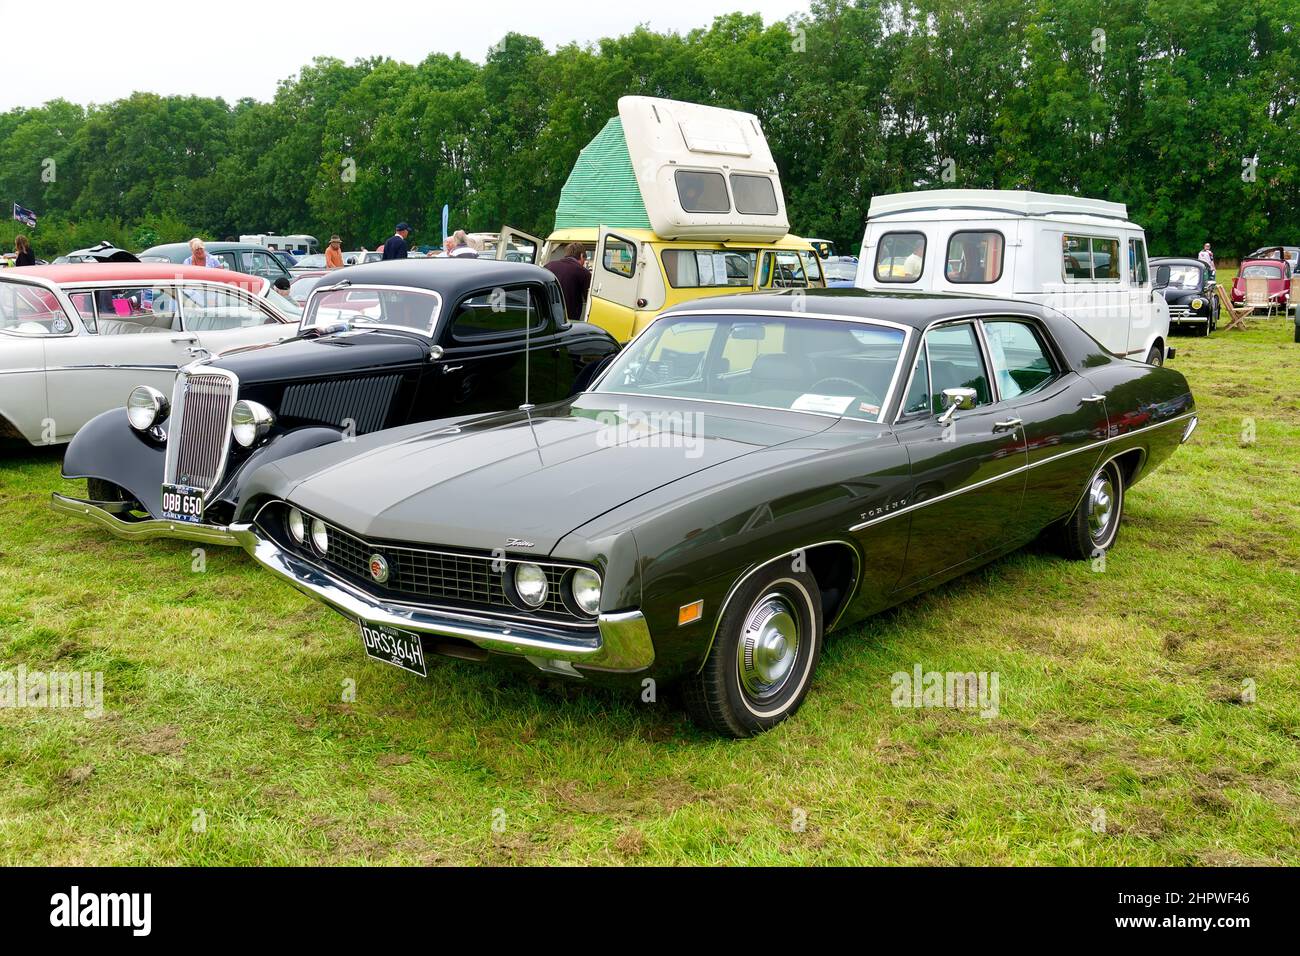 Westbury, Wiltshire, UK - September 5 2021: A 1970 Ford Torino at the 2021 White Horse  Classic and Vintage vehicle show Stock Photo